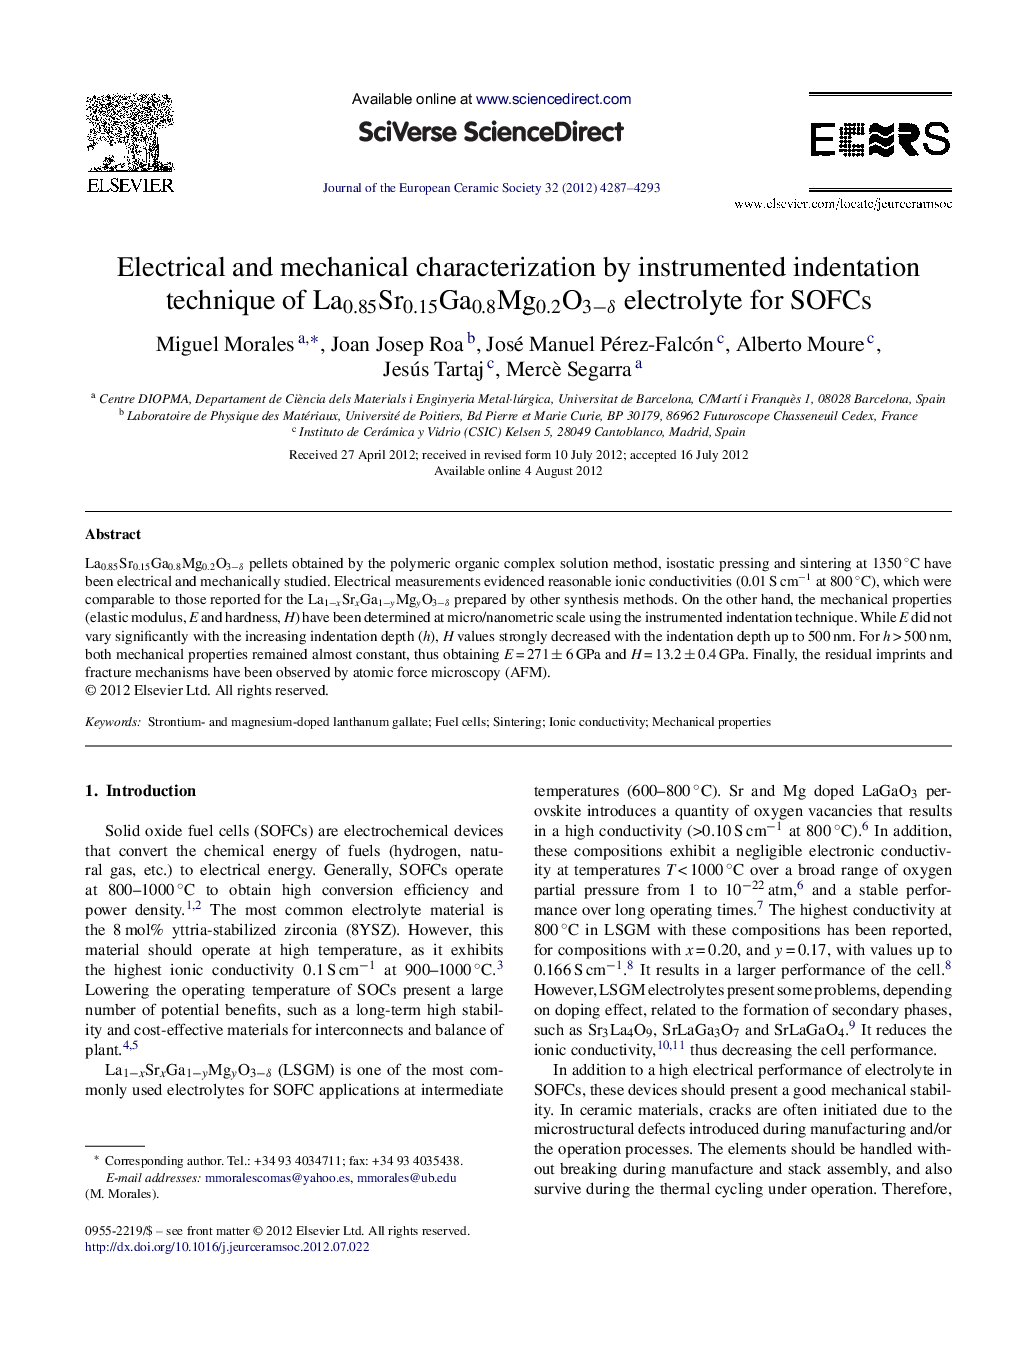 Electrical and mechanical characterization by instrumented indentation technique of La0.85Sr0.15Ga0.8Mg0.2O3−δ electrolyte for SOFCs